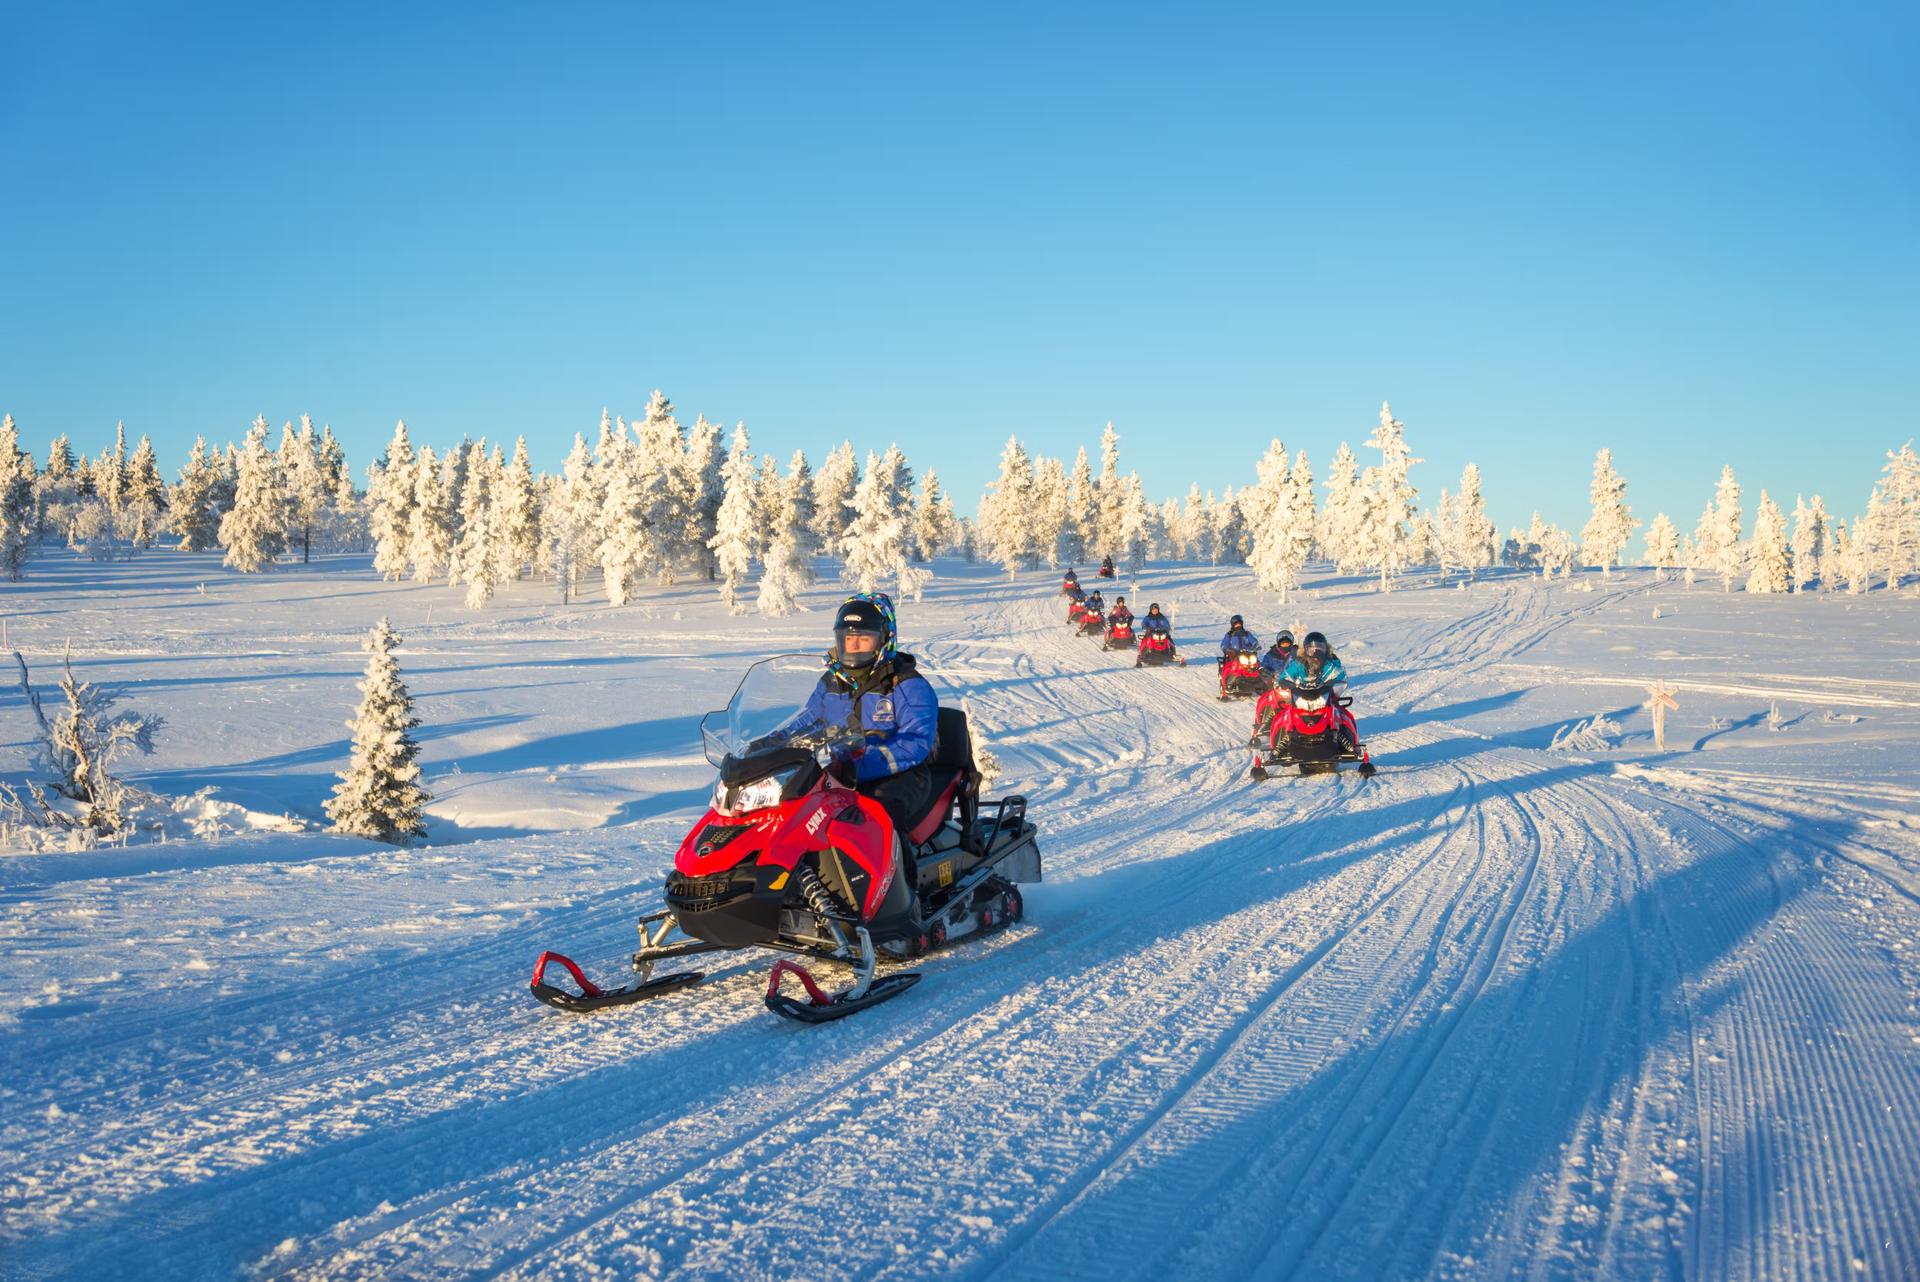 Tourists riding on snowmobiles through snowy conditions in Lapland.